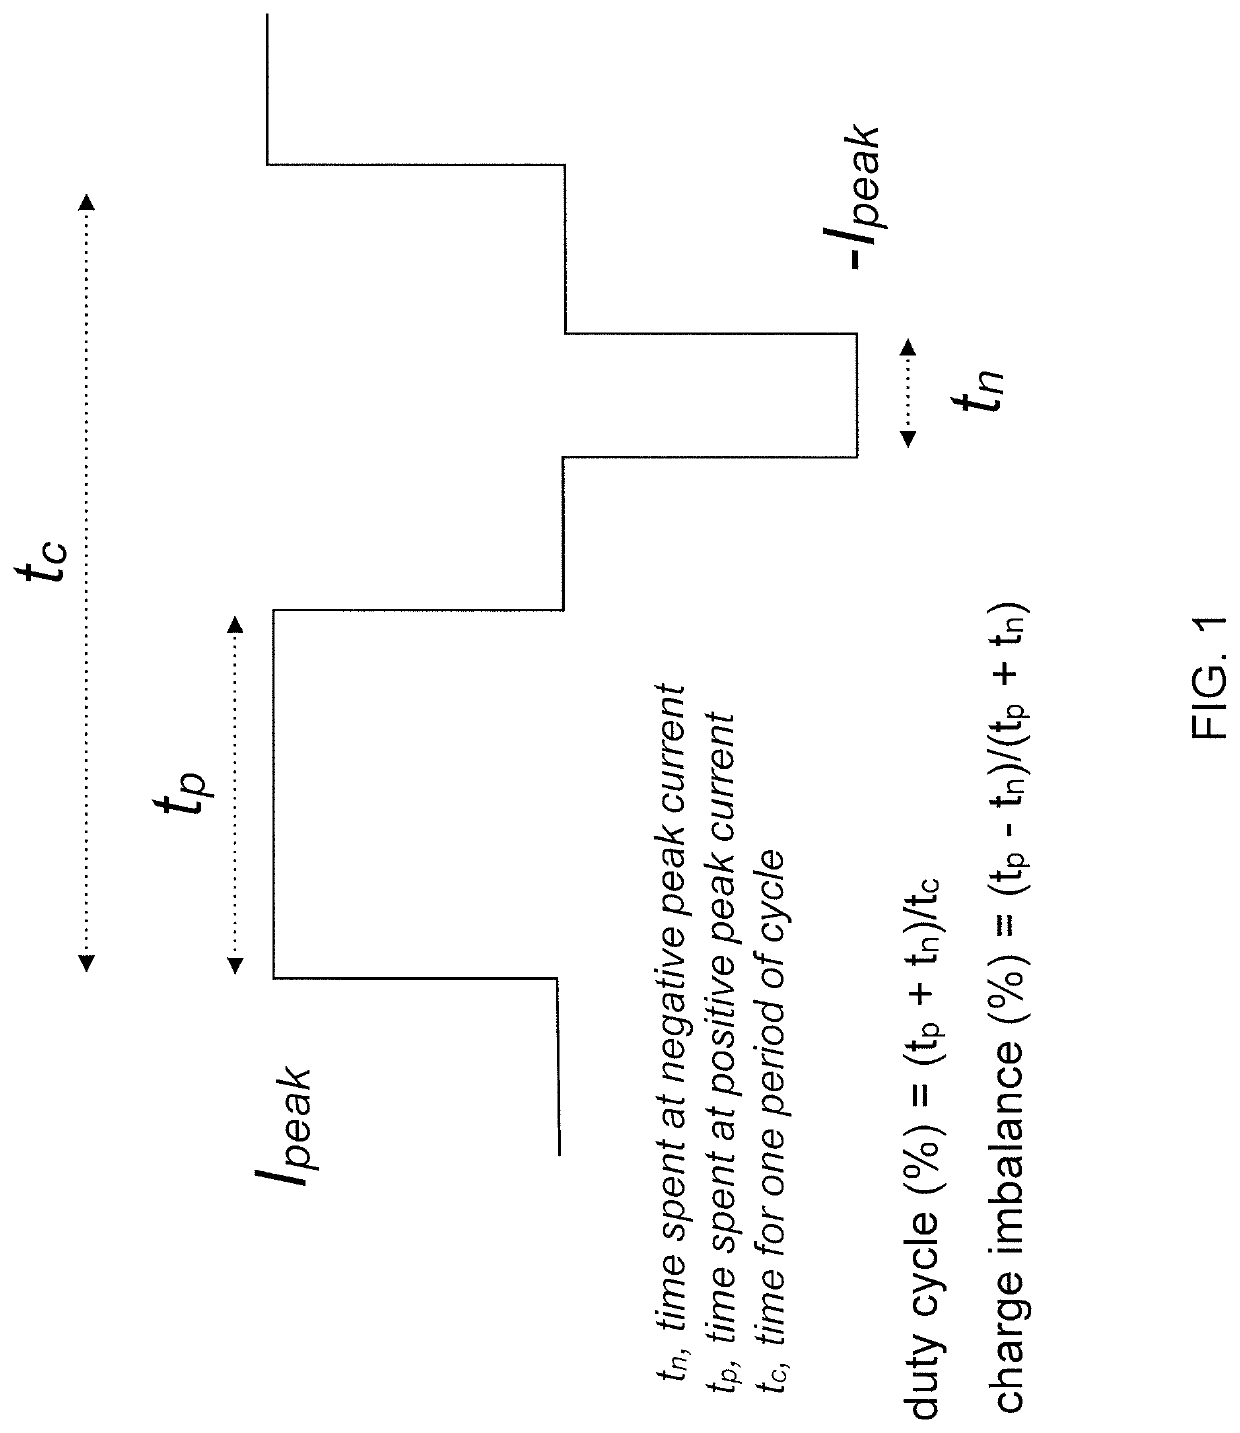 Systems and methods for transdermal electrical stimulation to improve sleep